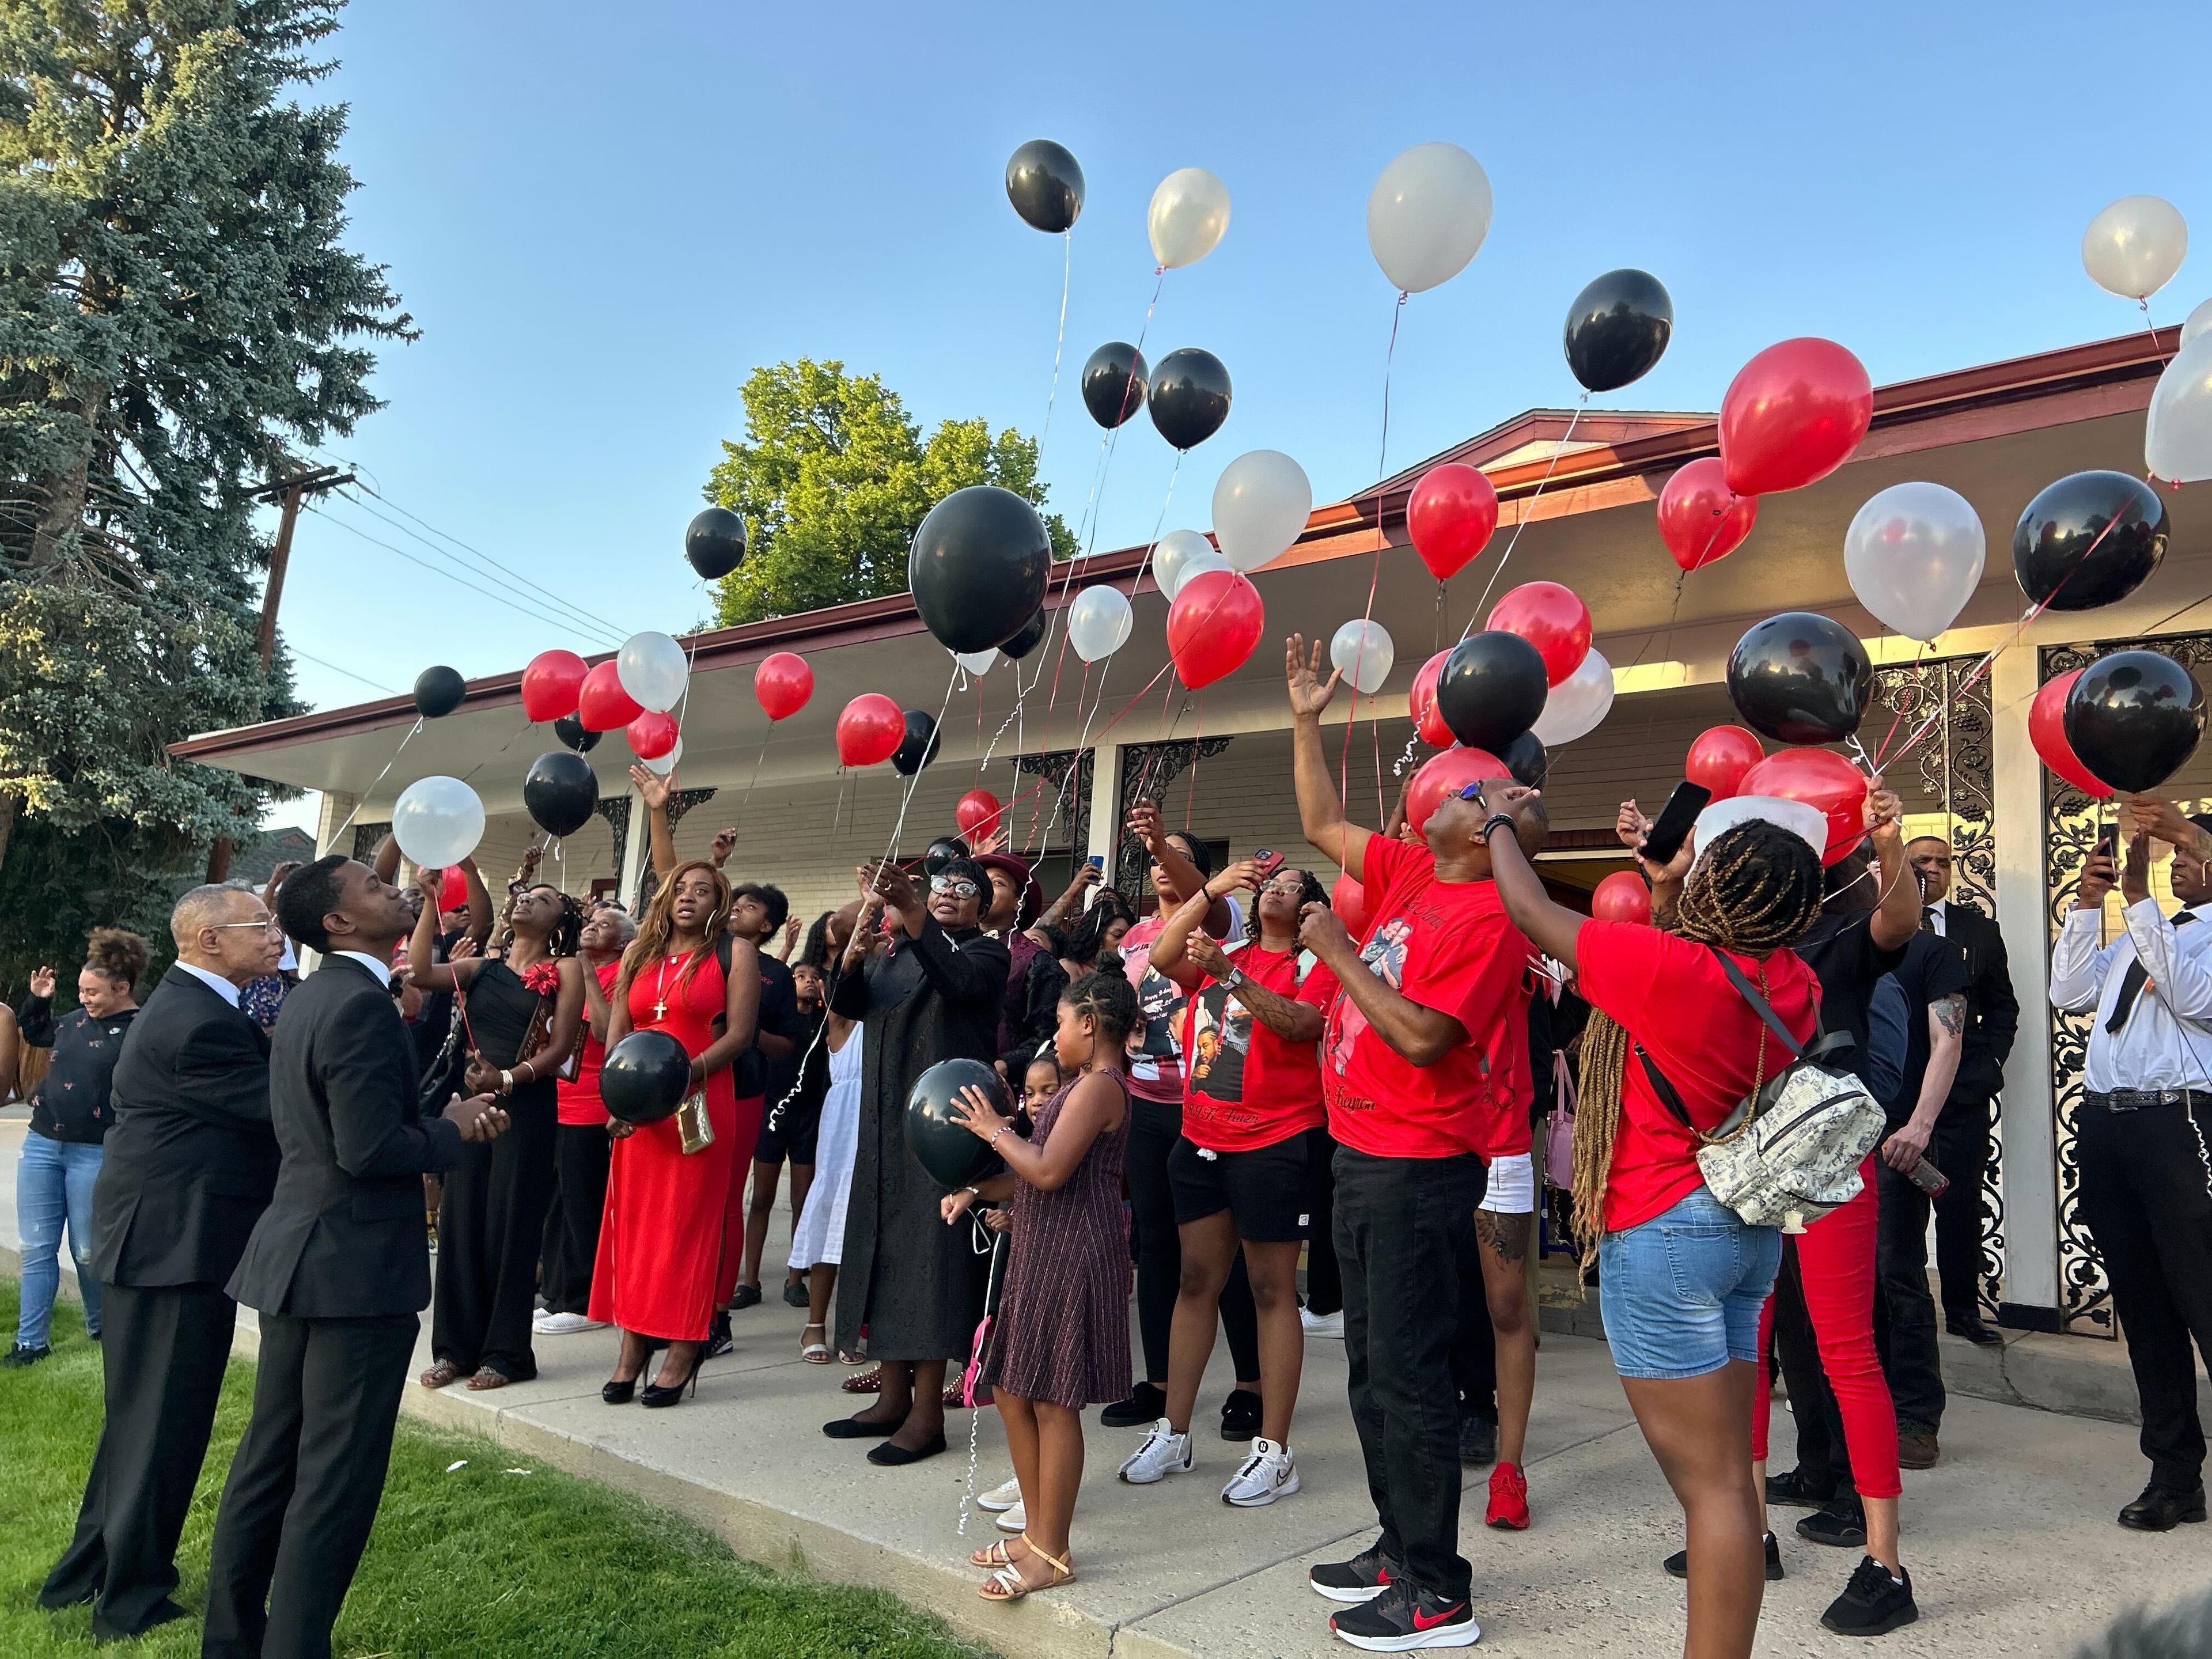 Family and friends release red, black, and white balloons in the air in memory of Kilyn Lewis, who recently died after being shot and killed by officers last month.